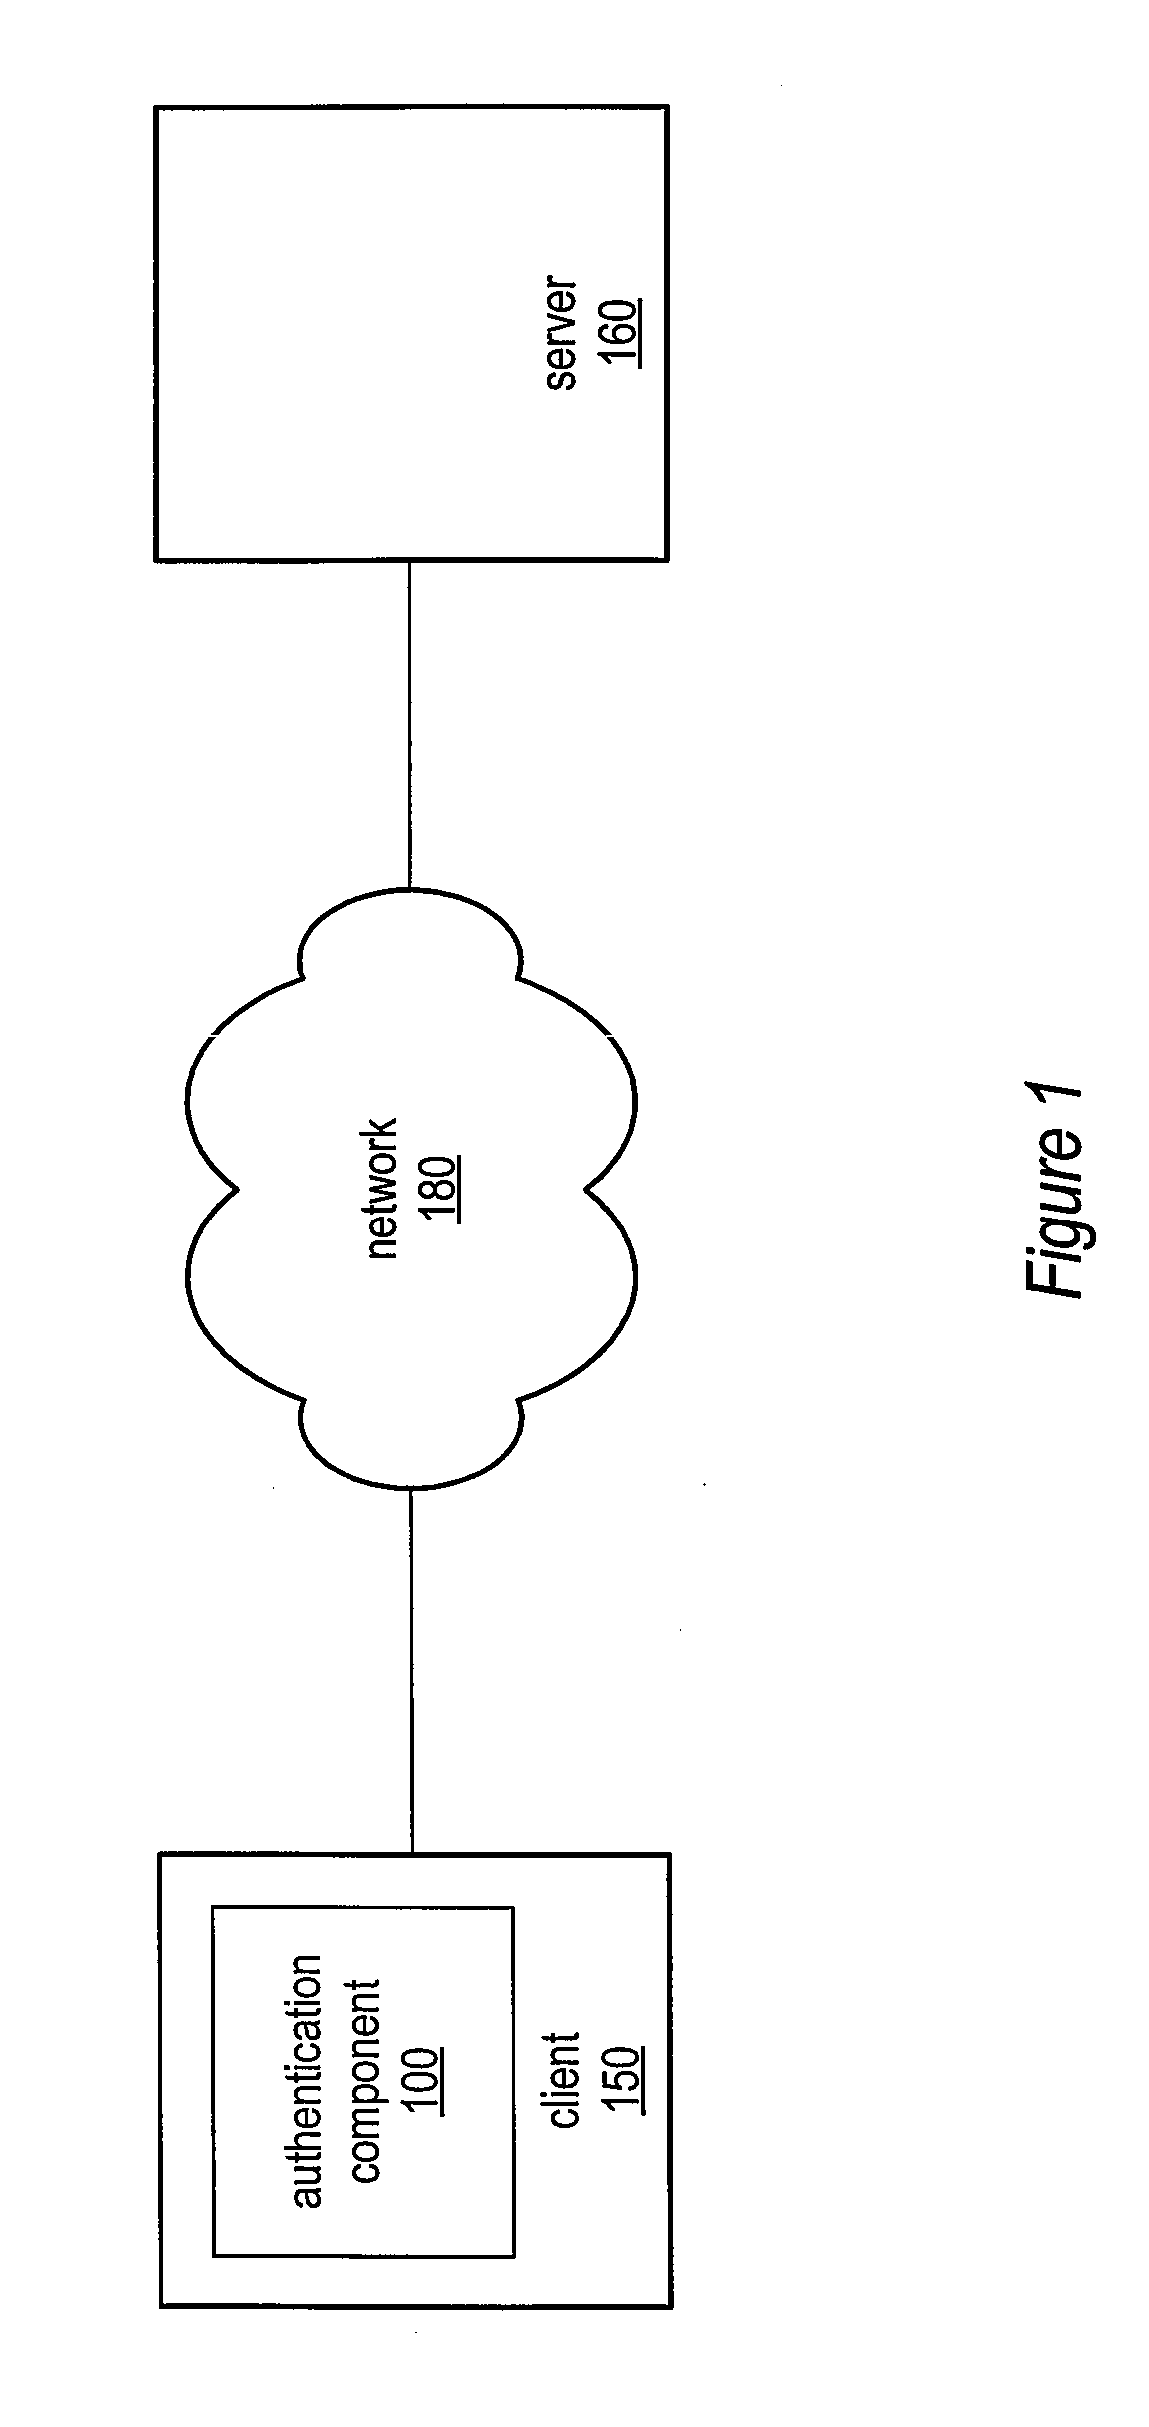 System and Method for Secure Password-Based Authentication